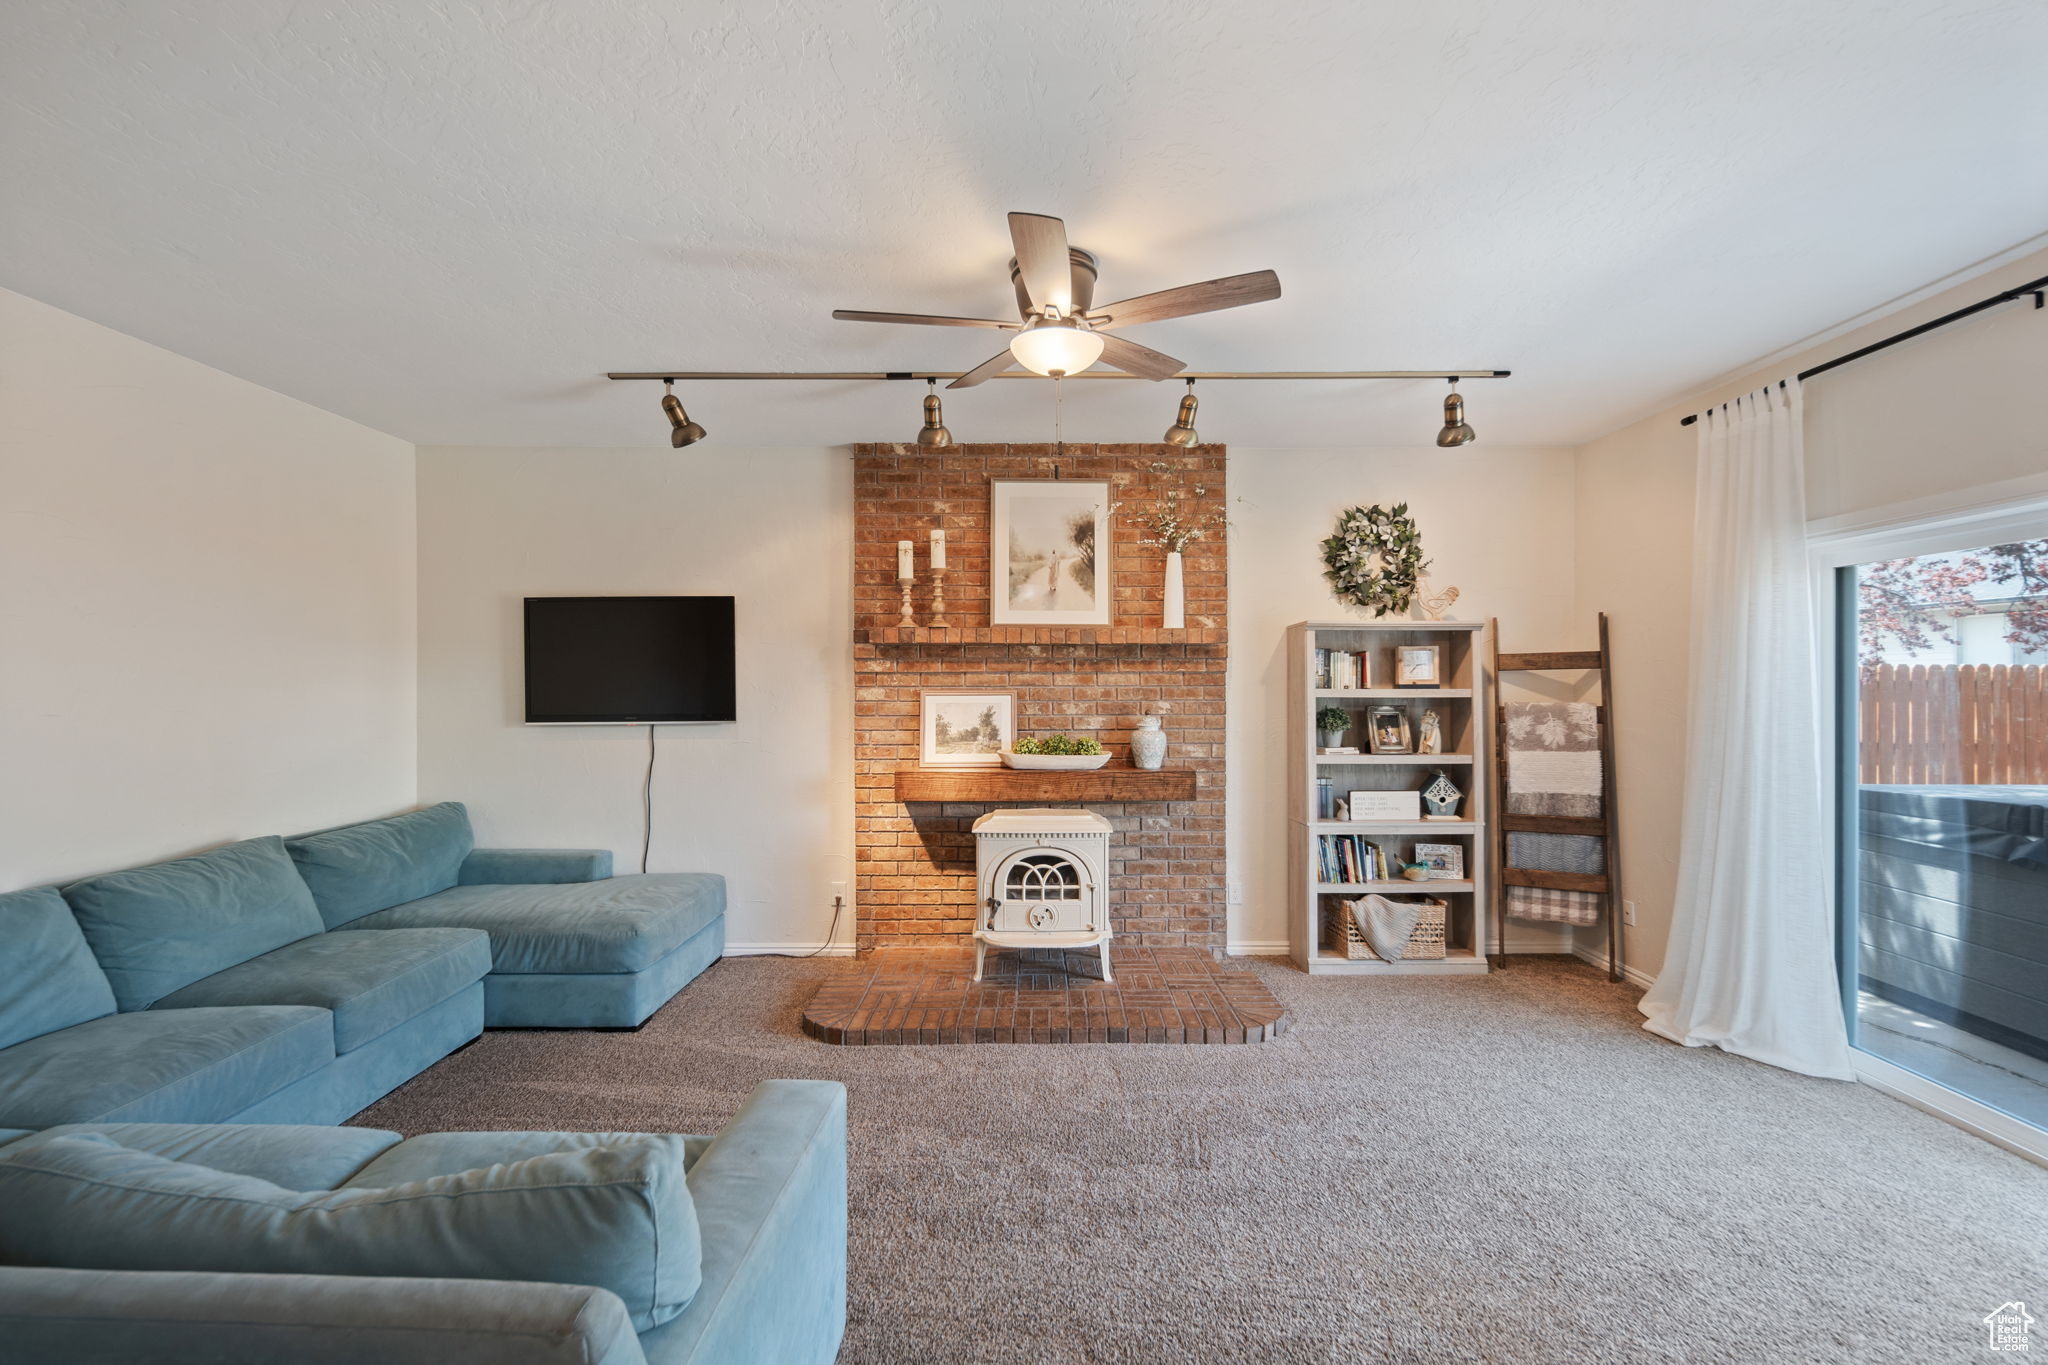 Living room with ceiling fan, track lighting, and carpet floors